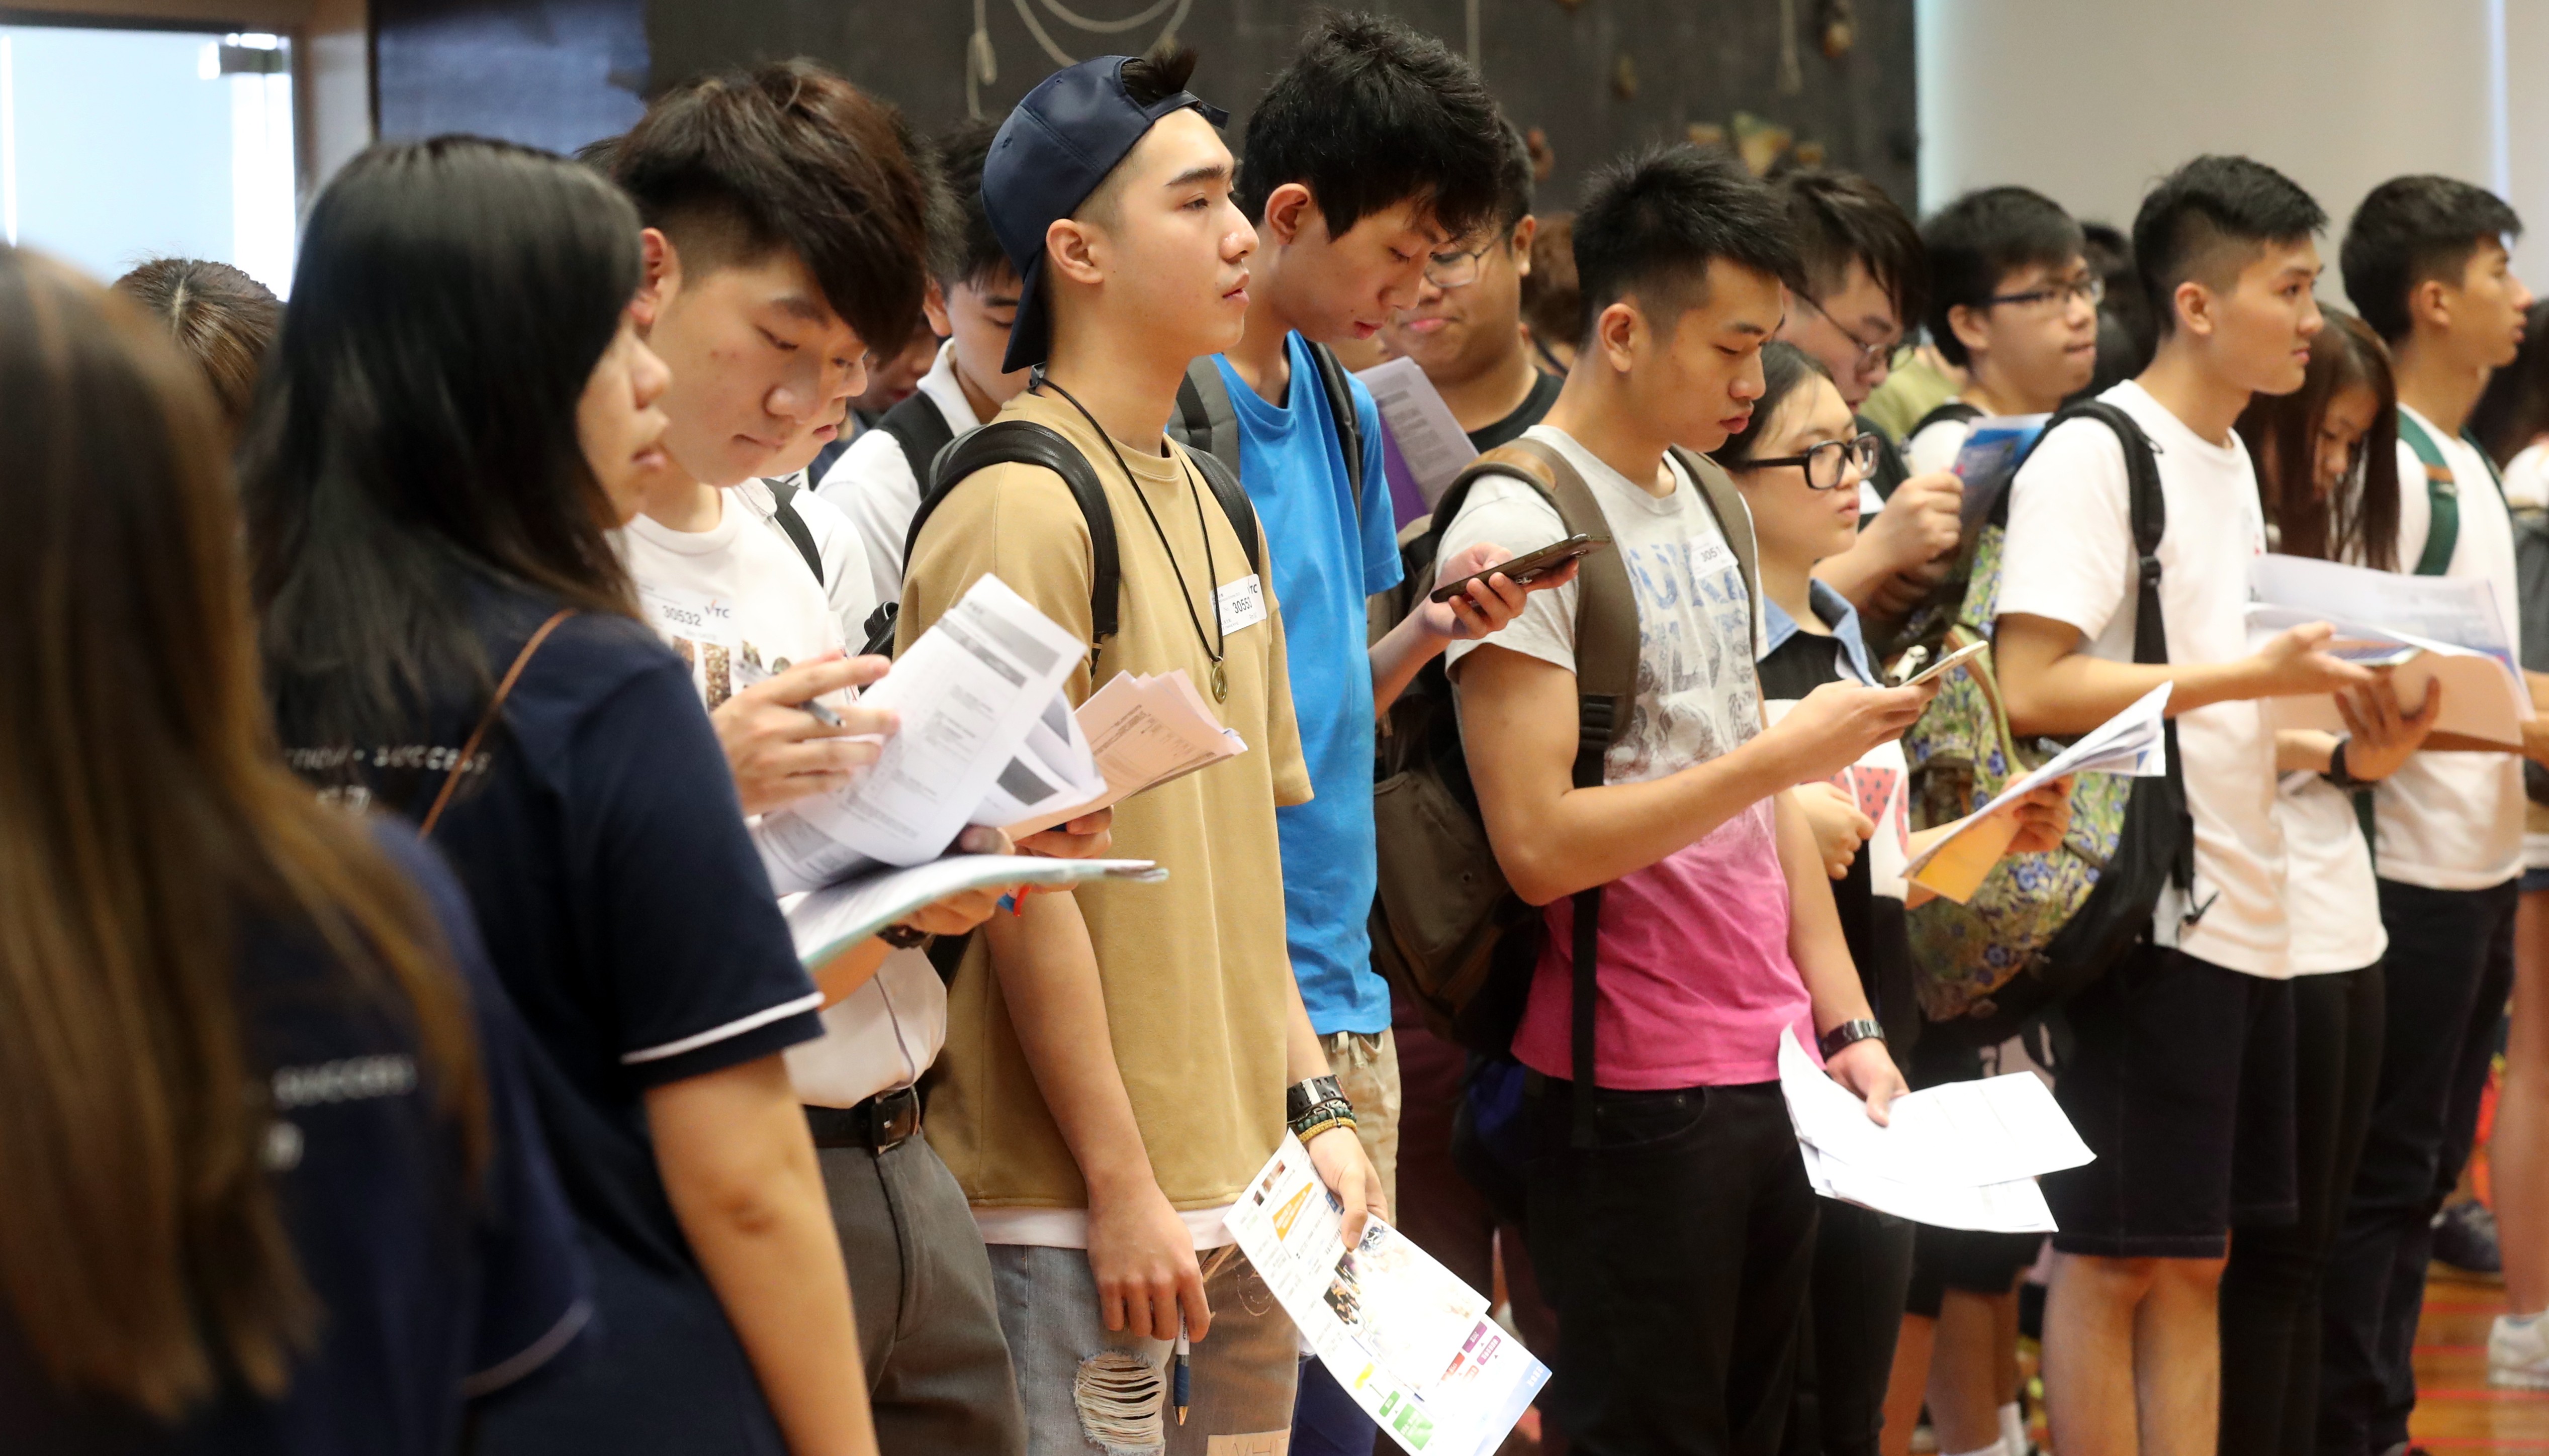 Students register for courses at the Vocational Training Centre's Institute for Vocational Education campus in Cheung Sha Wan. Photo: Edward Wong.